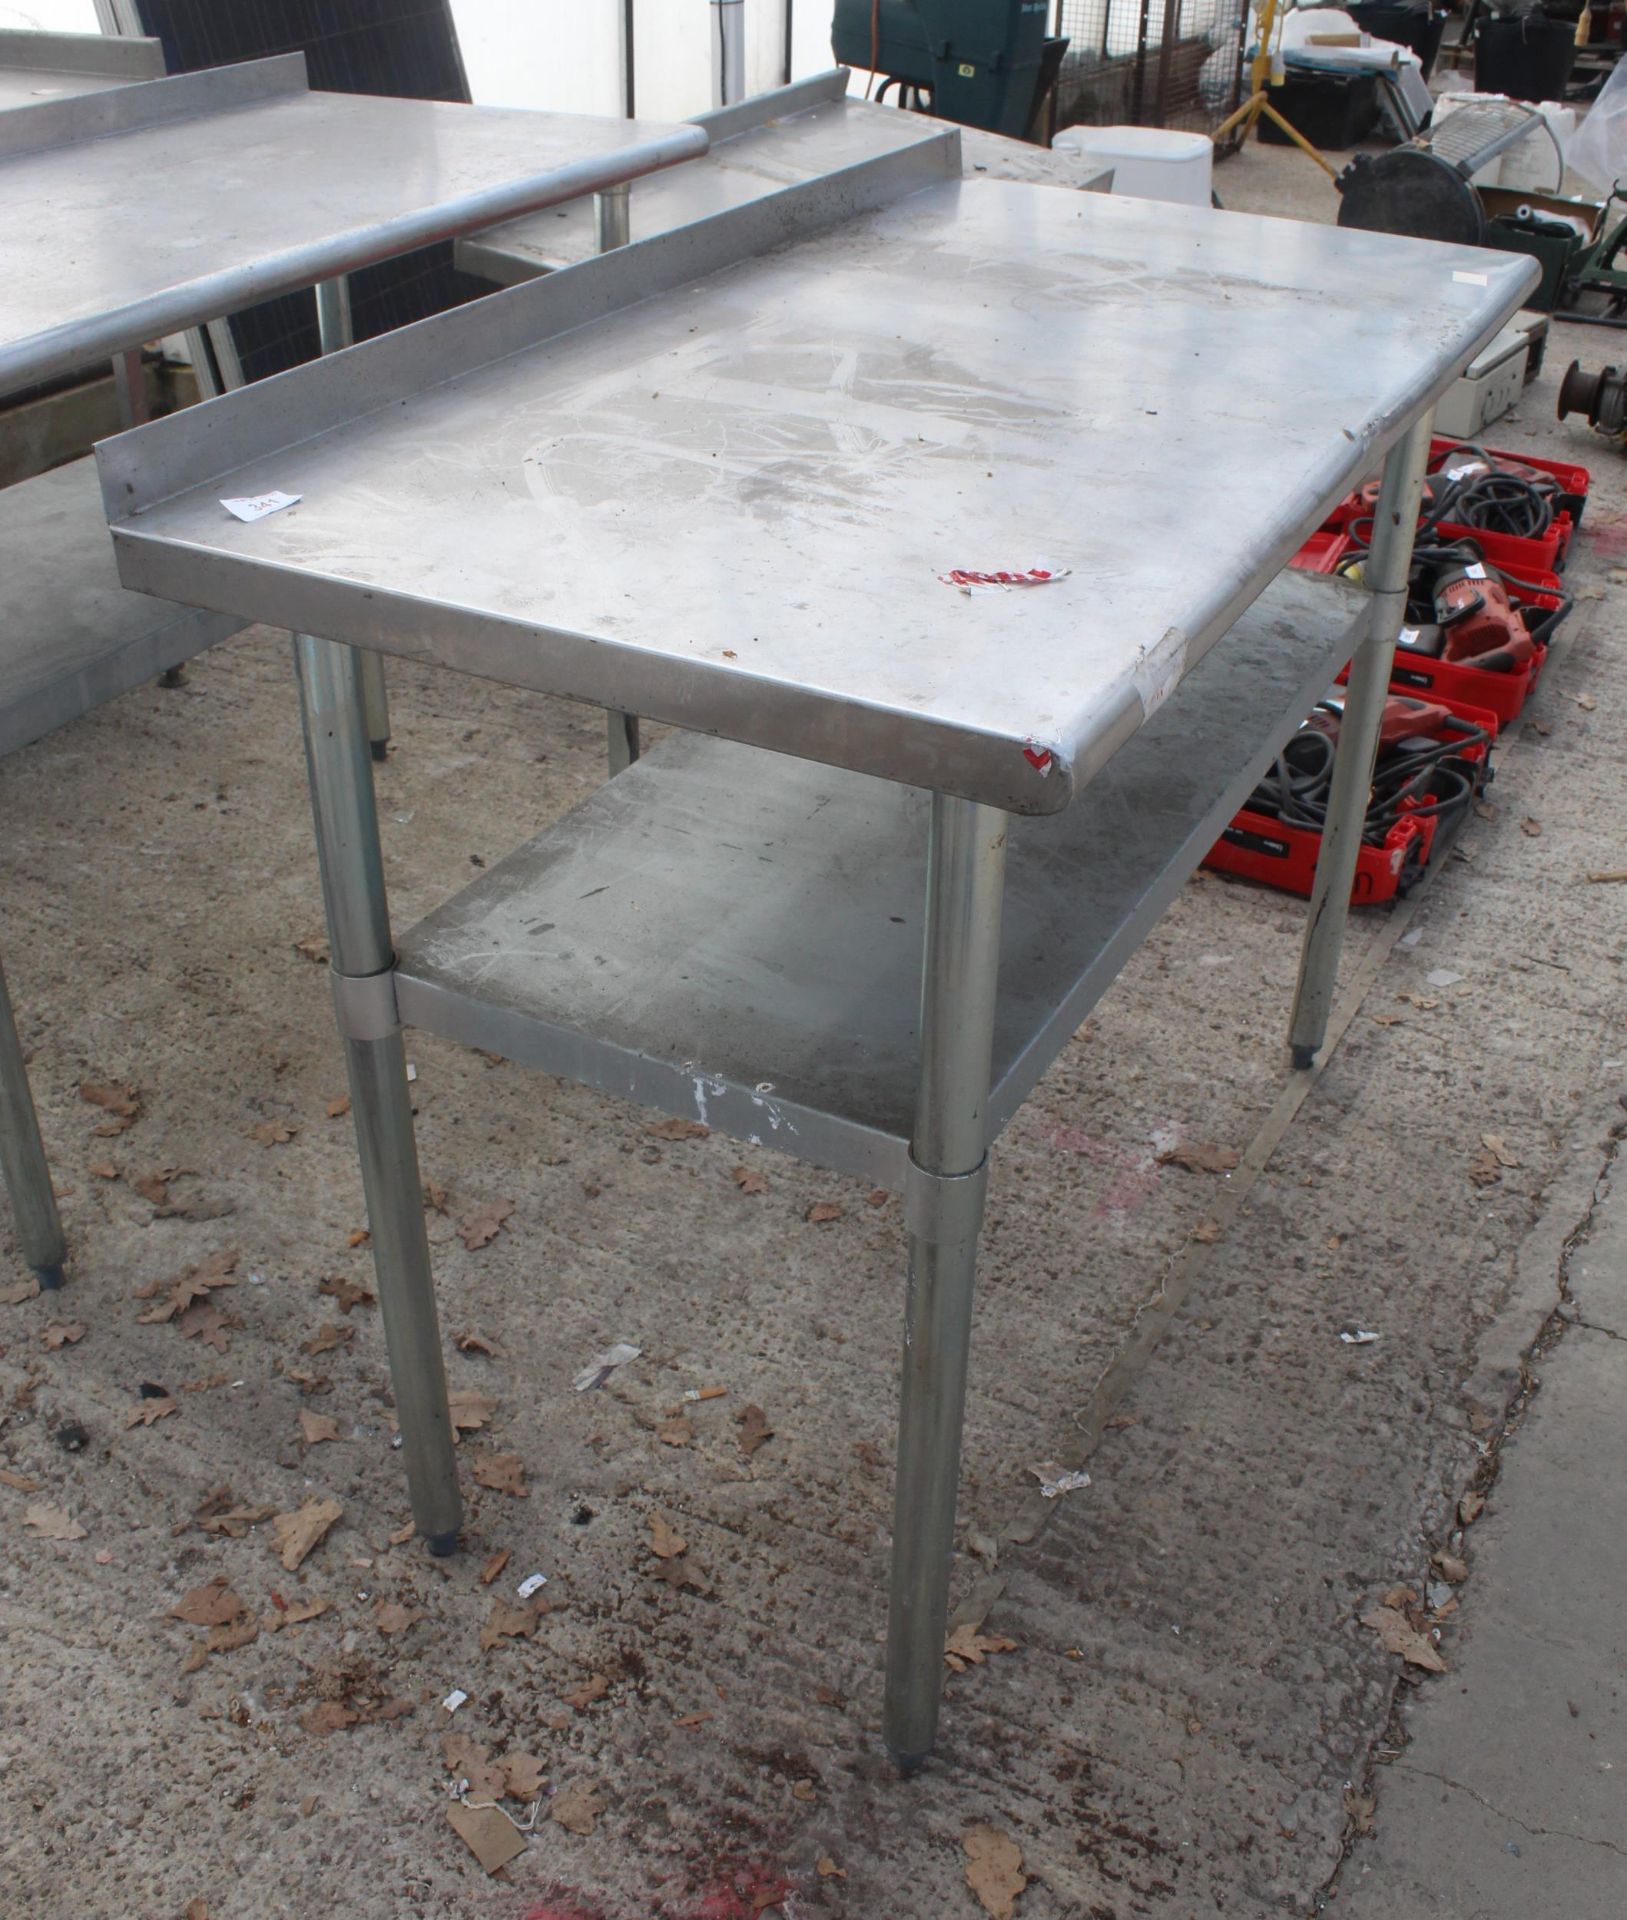 STAINLESS TABLE NO VAT